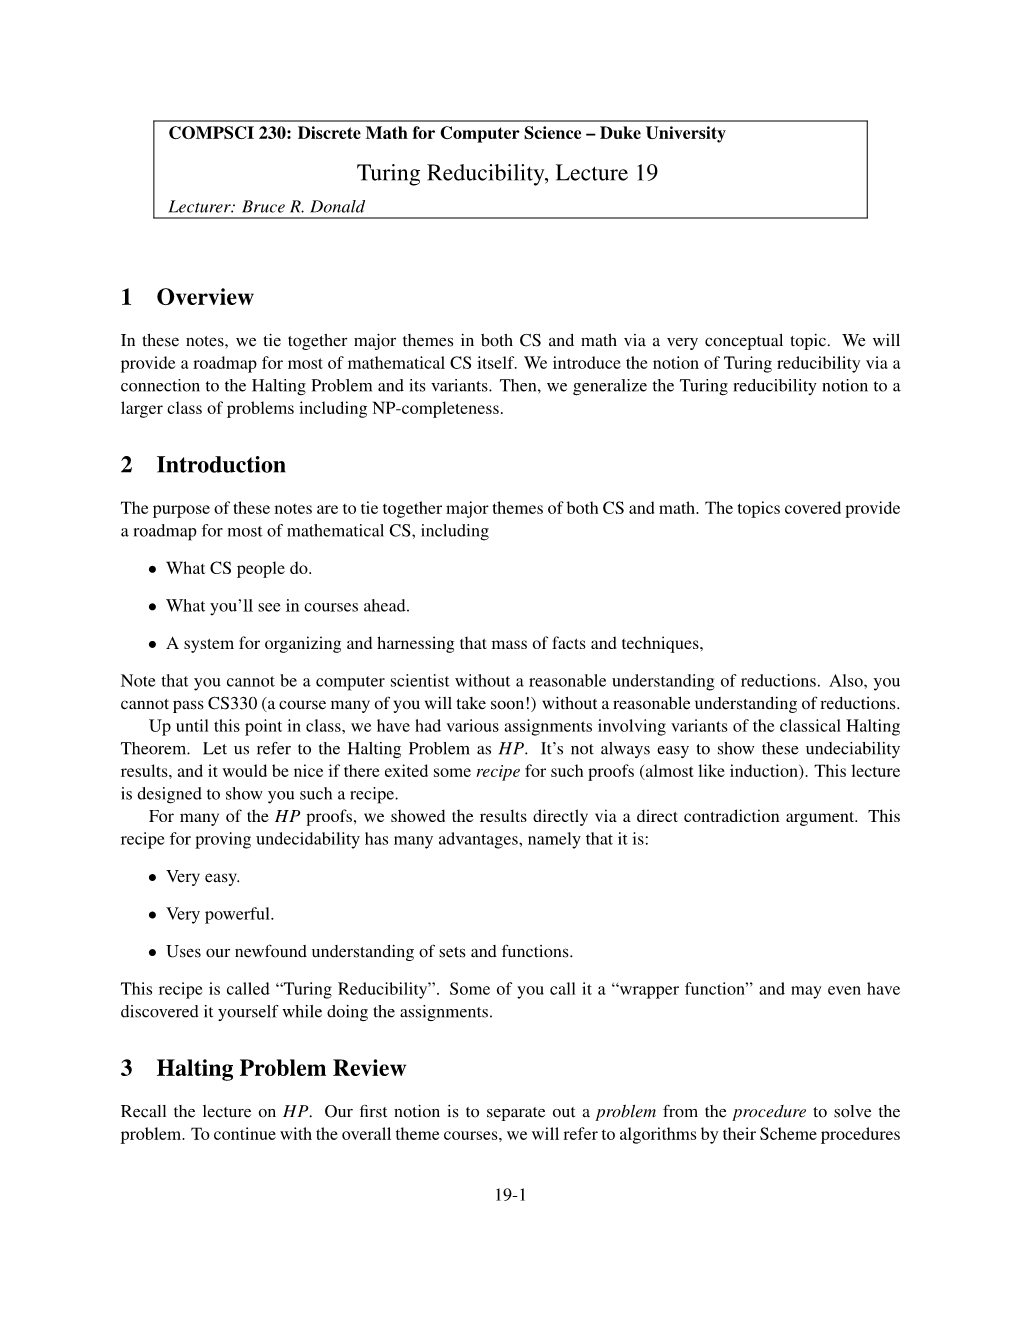 Turing Reducibility, Lecture 19 1 Overview 2 Introduction 3 Halting Problem Review